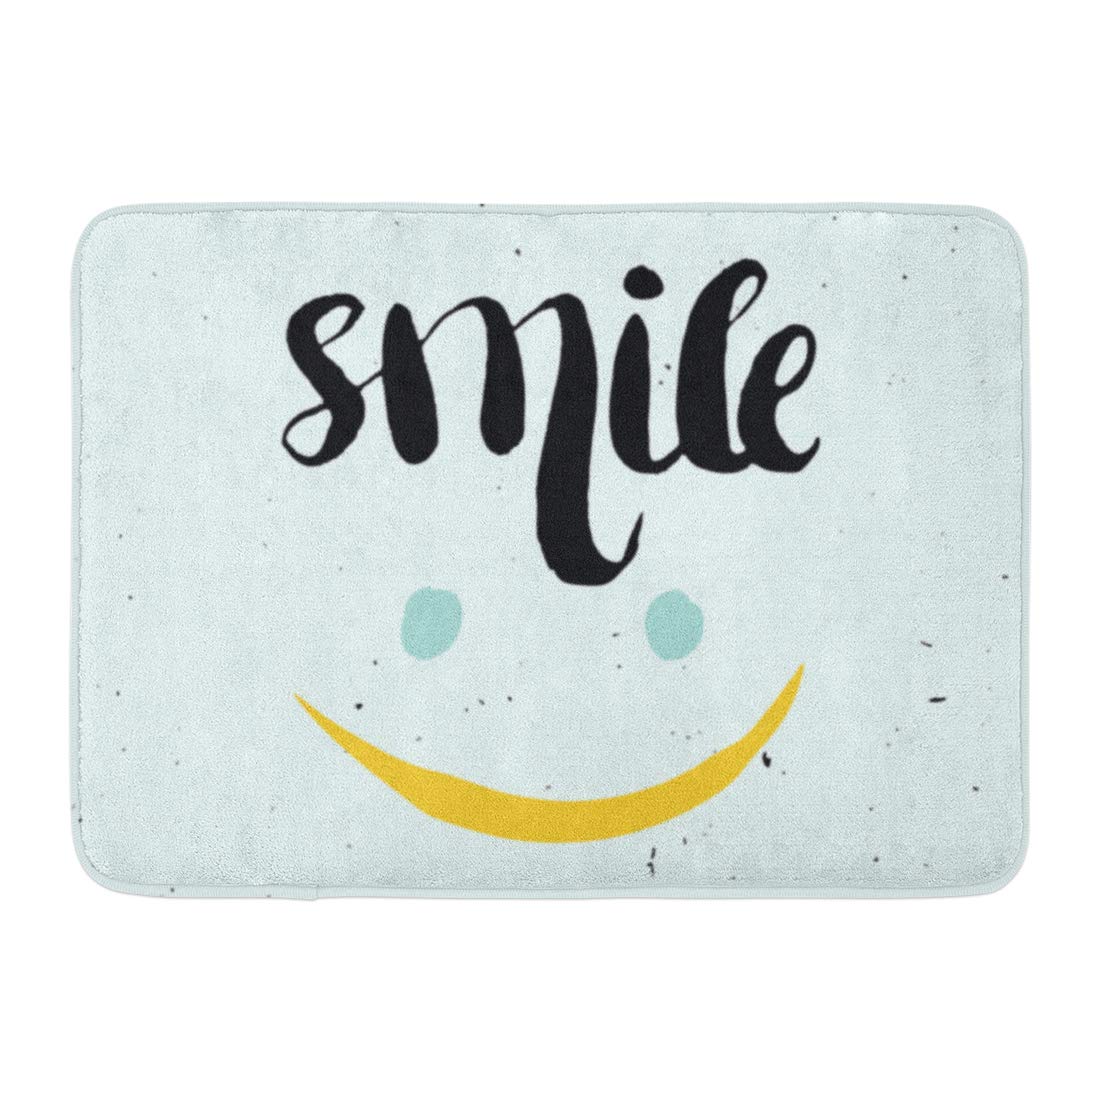 GODPOK Sketch White Day Hand Lettering Calligraphy in Colorful Style Labels Signs Prints The Smile Quote Joy Rug Doormat Bath Mat 23.6x15.7 inch - image 1 of 1